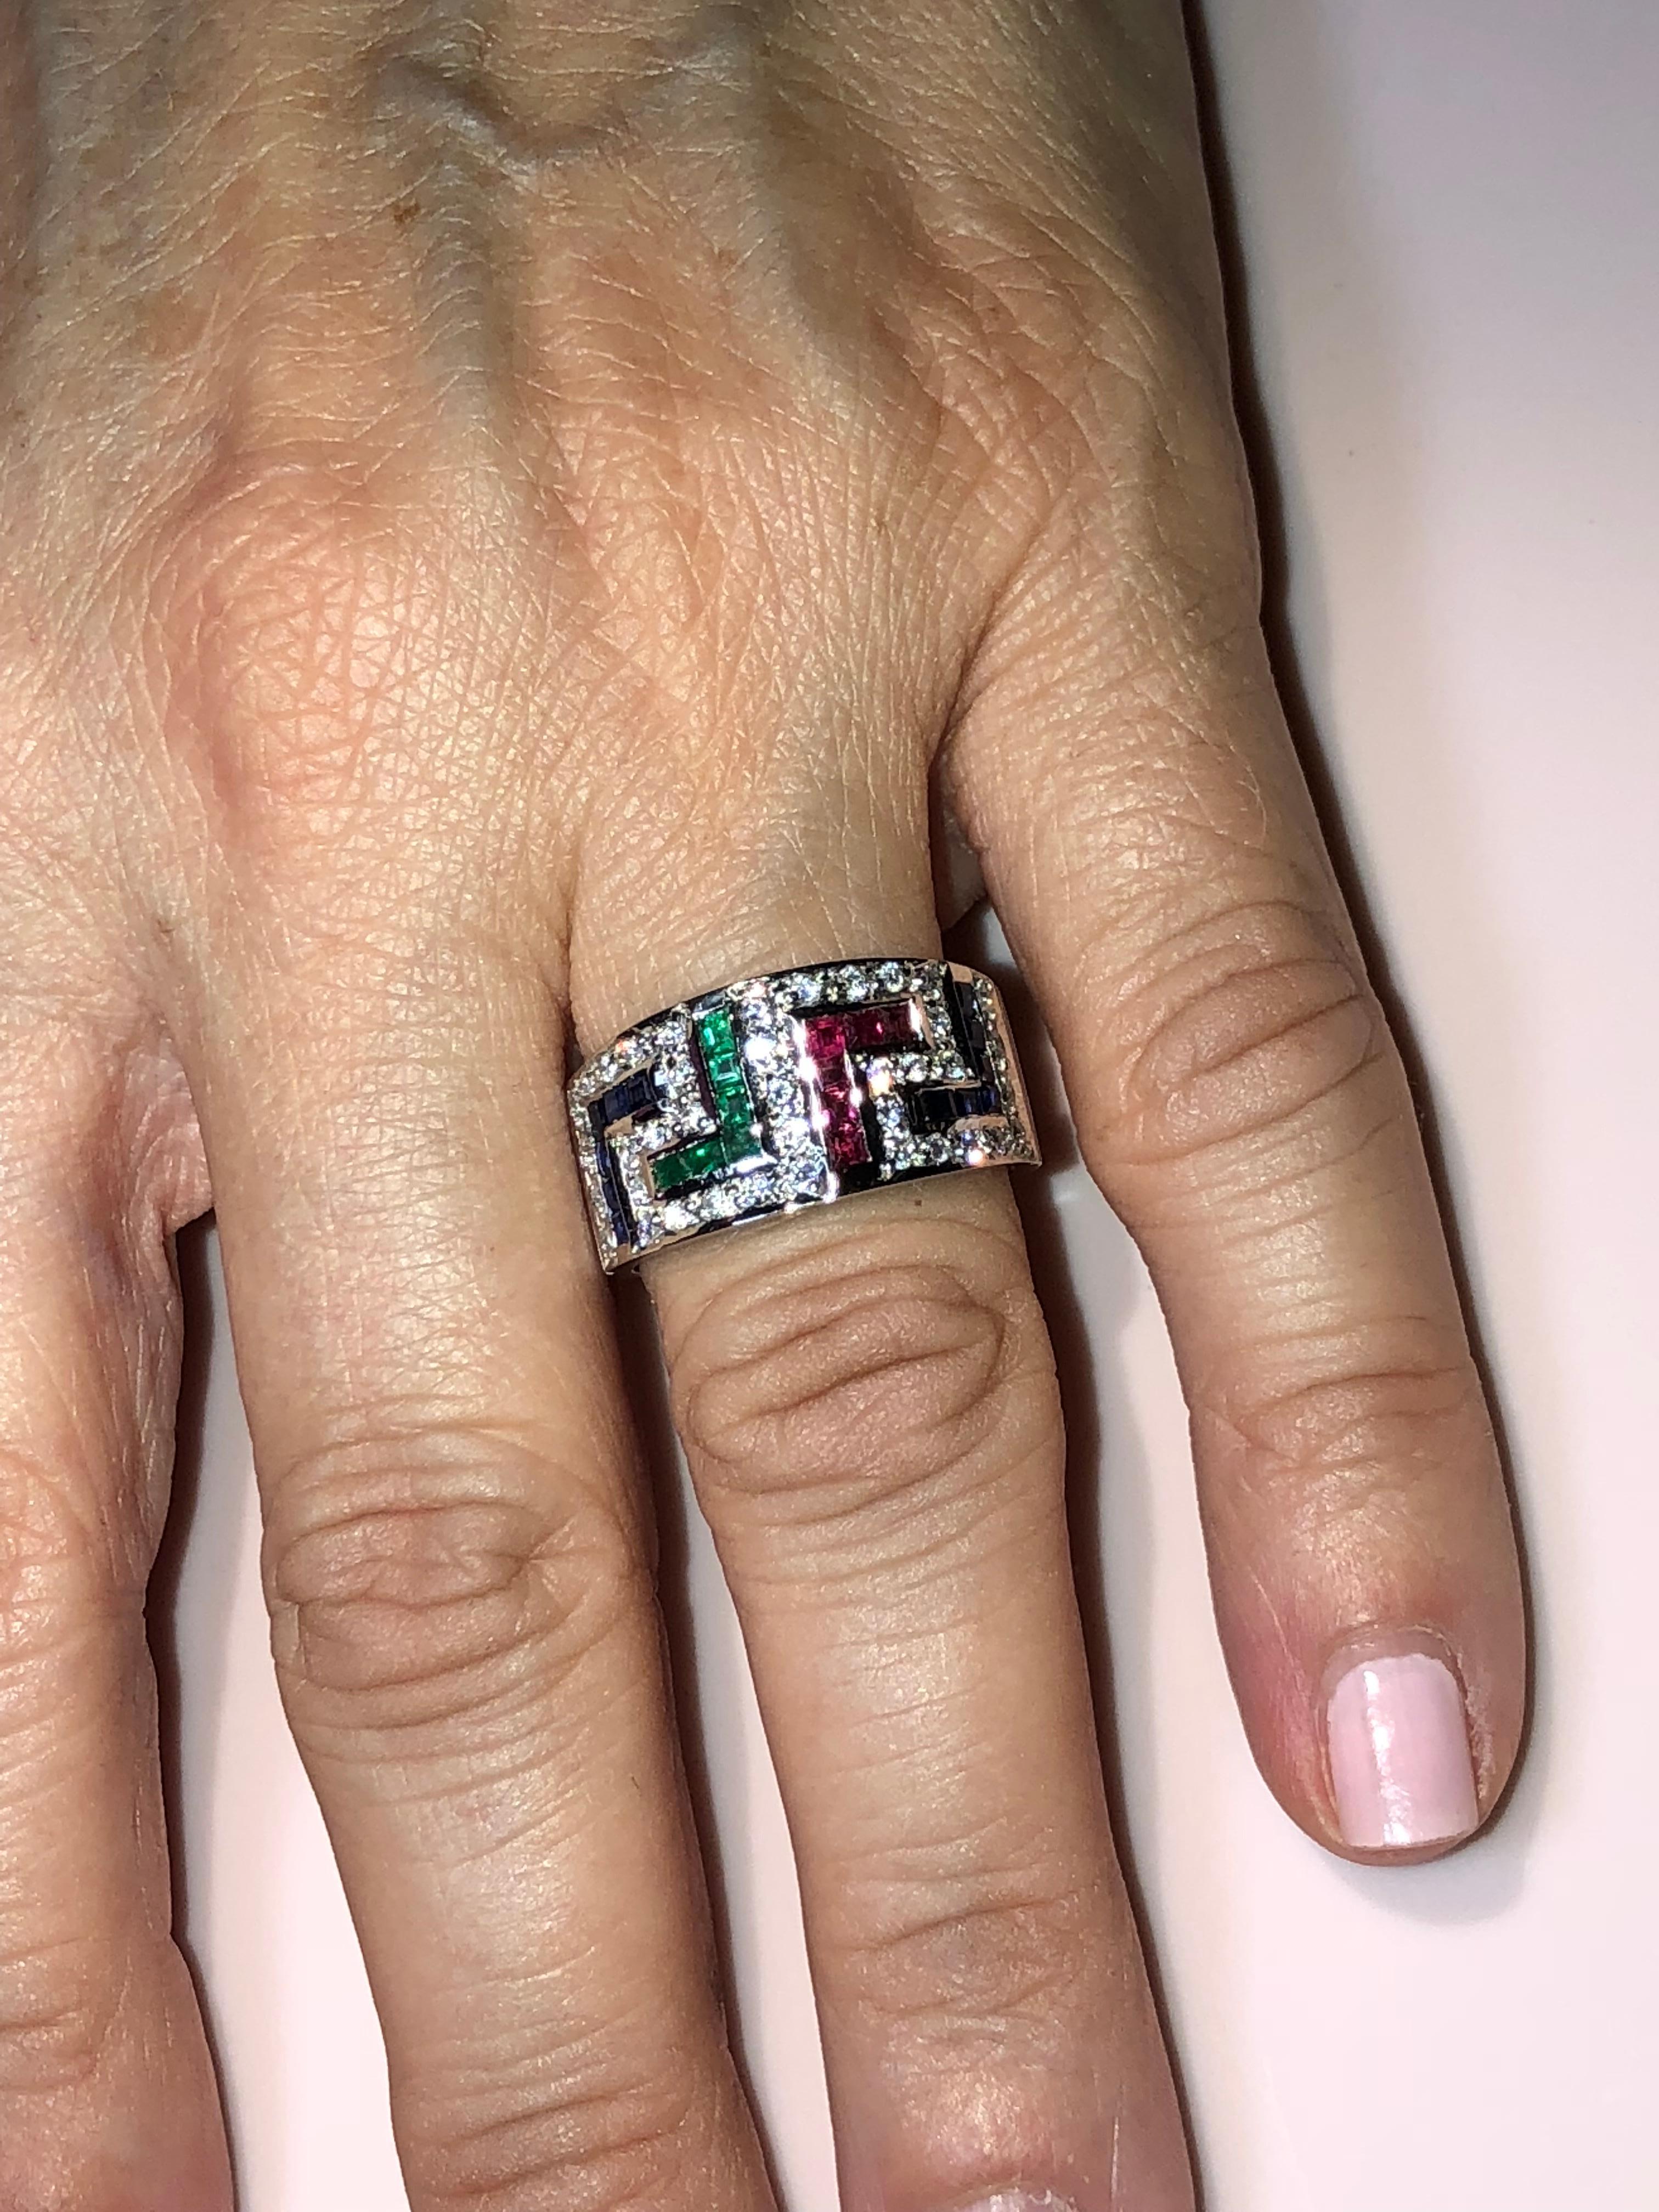 S.Georgios designer 18 Karat White Gold Ring featuring the Greek Key design symbolizing eternity. It has Brilliant Cut White Diamonds total weight of 0.44 Carat, and Princess cut Rubies, Sapphires and Emeralds total weight of 1.05 Carat. The quality